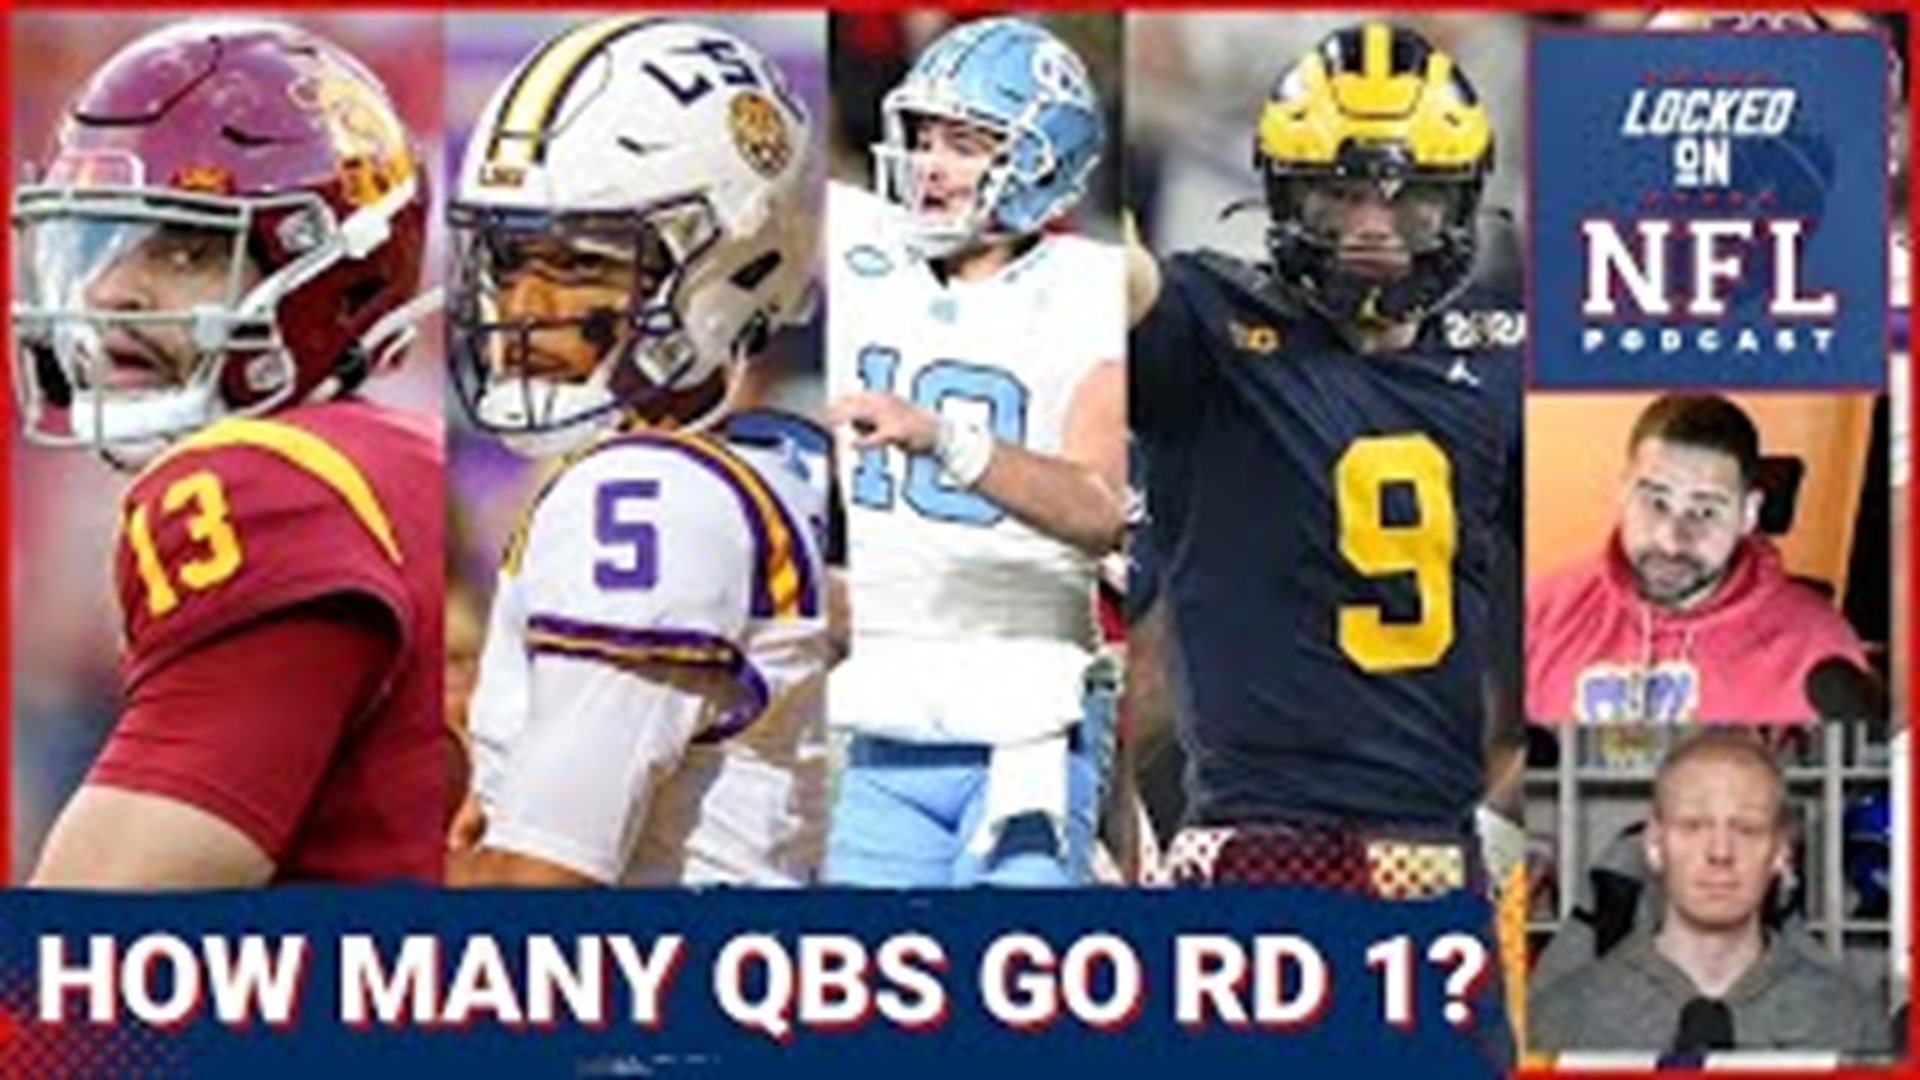 Mel Kiper Jr. released his latest mock draft and has five quarterbacks being selected in the first round of the NFL Draft. Is that too many? Or just right?